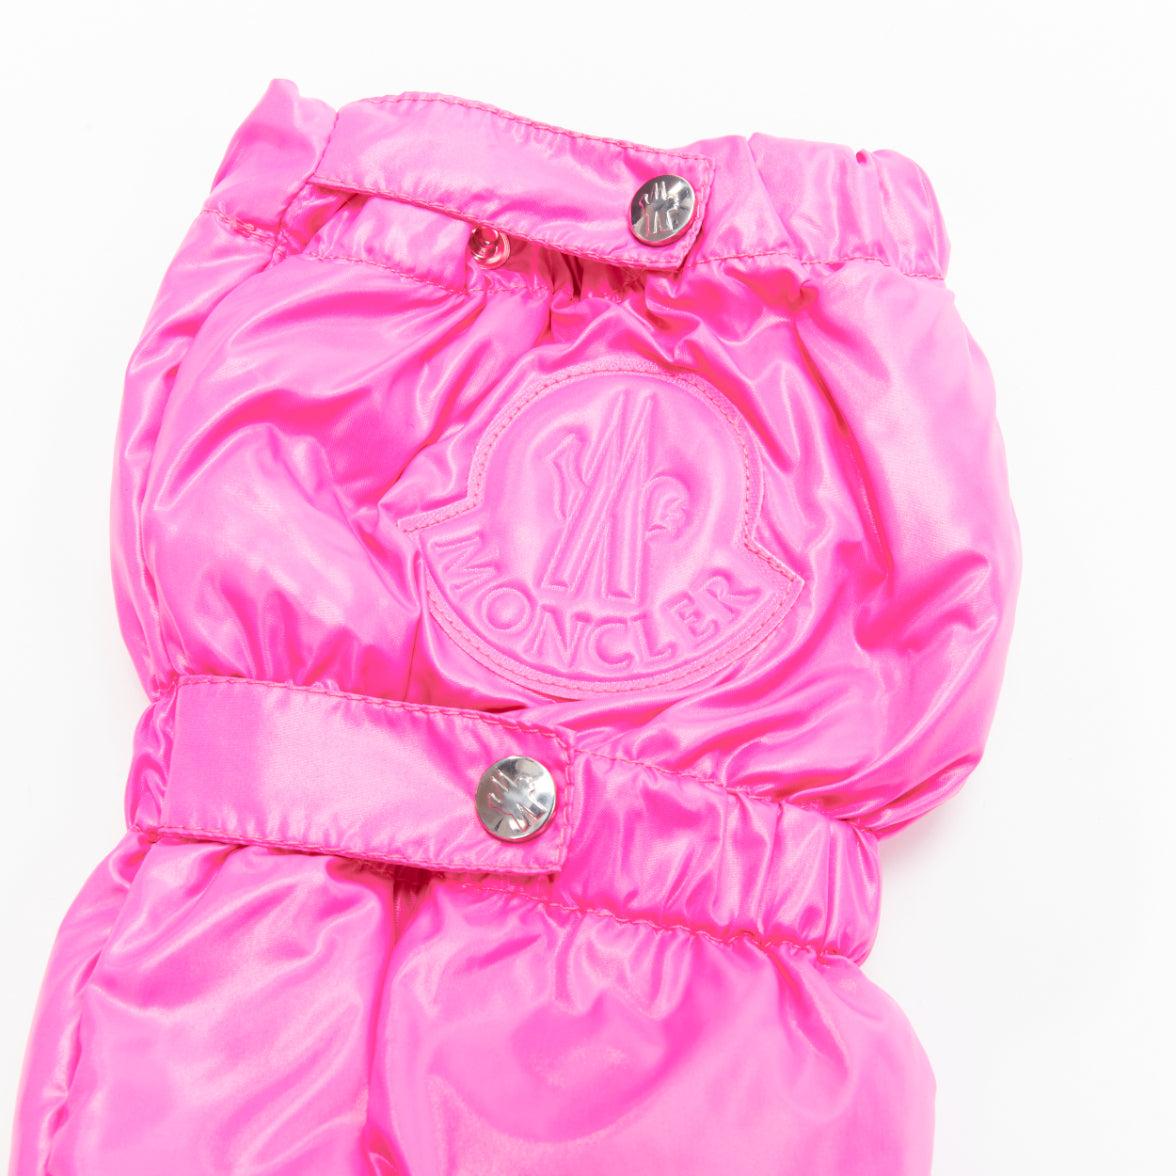 rare MONCLER Pierpaolo Piccioli hot pink leather logo down gloves
Reference: BSHW/A00102
Brand: Moncler
Designer: Pier Paolo Piccioli
Model: Norme Afnor
Material: Polyamide
Color: Pink
Pattern: Solid
Closure: Snap Buttons
Lining: Pink Down
Extra